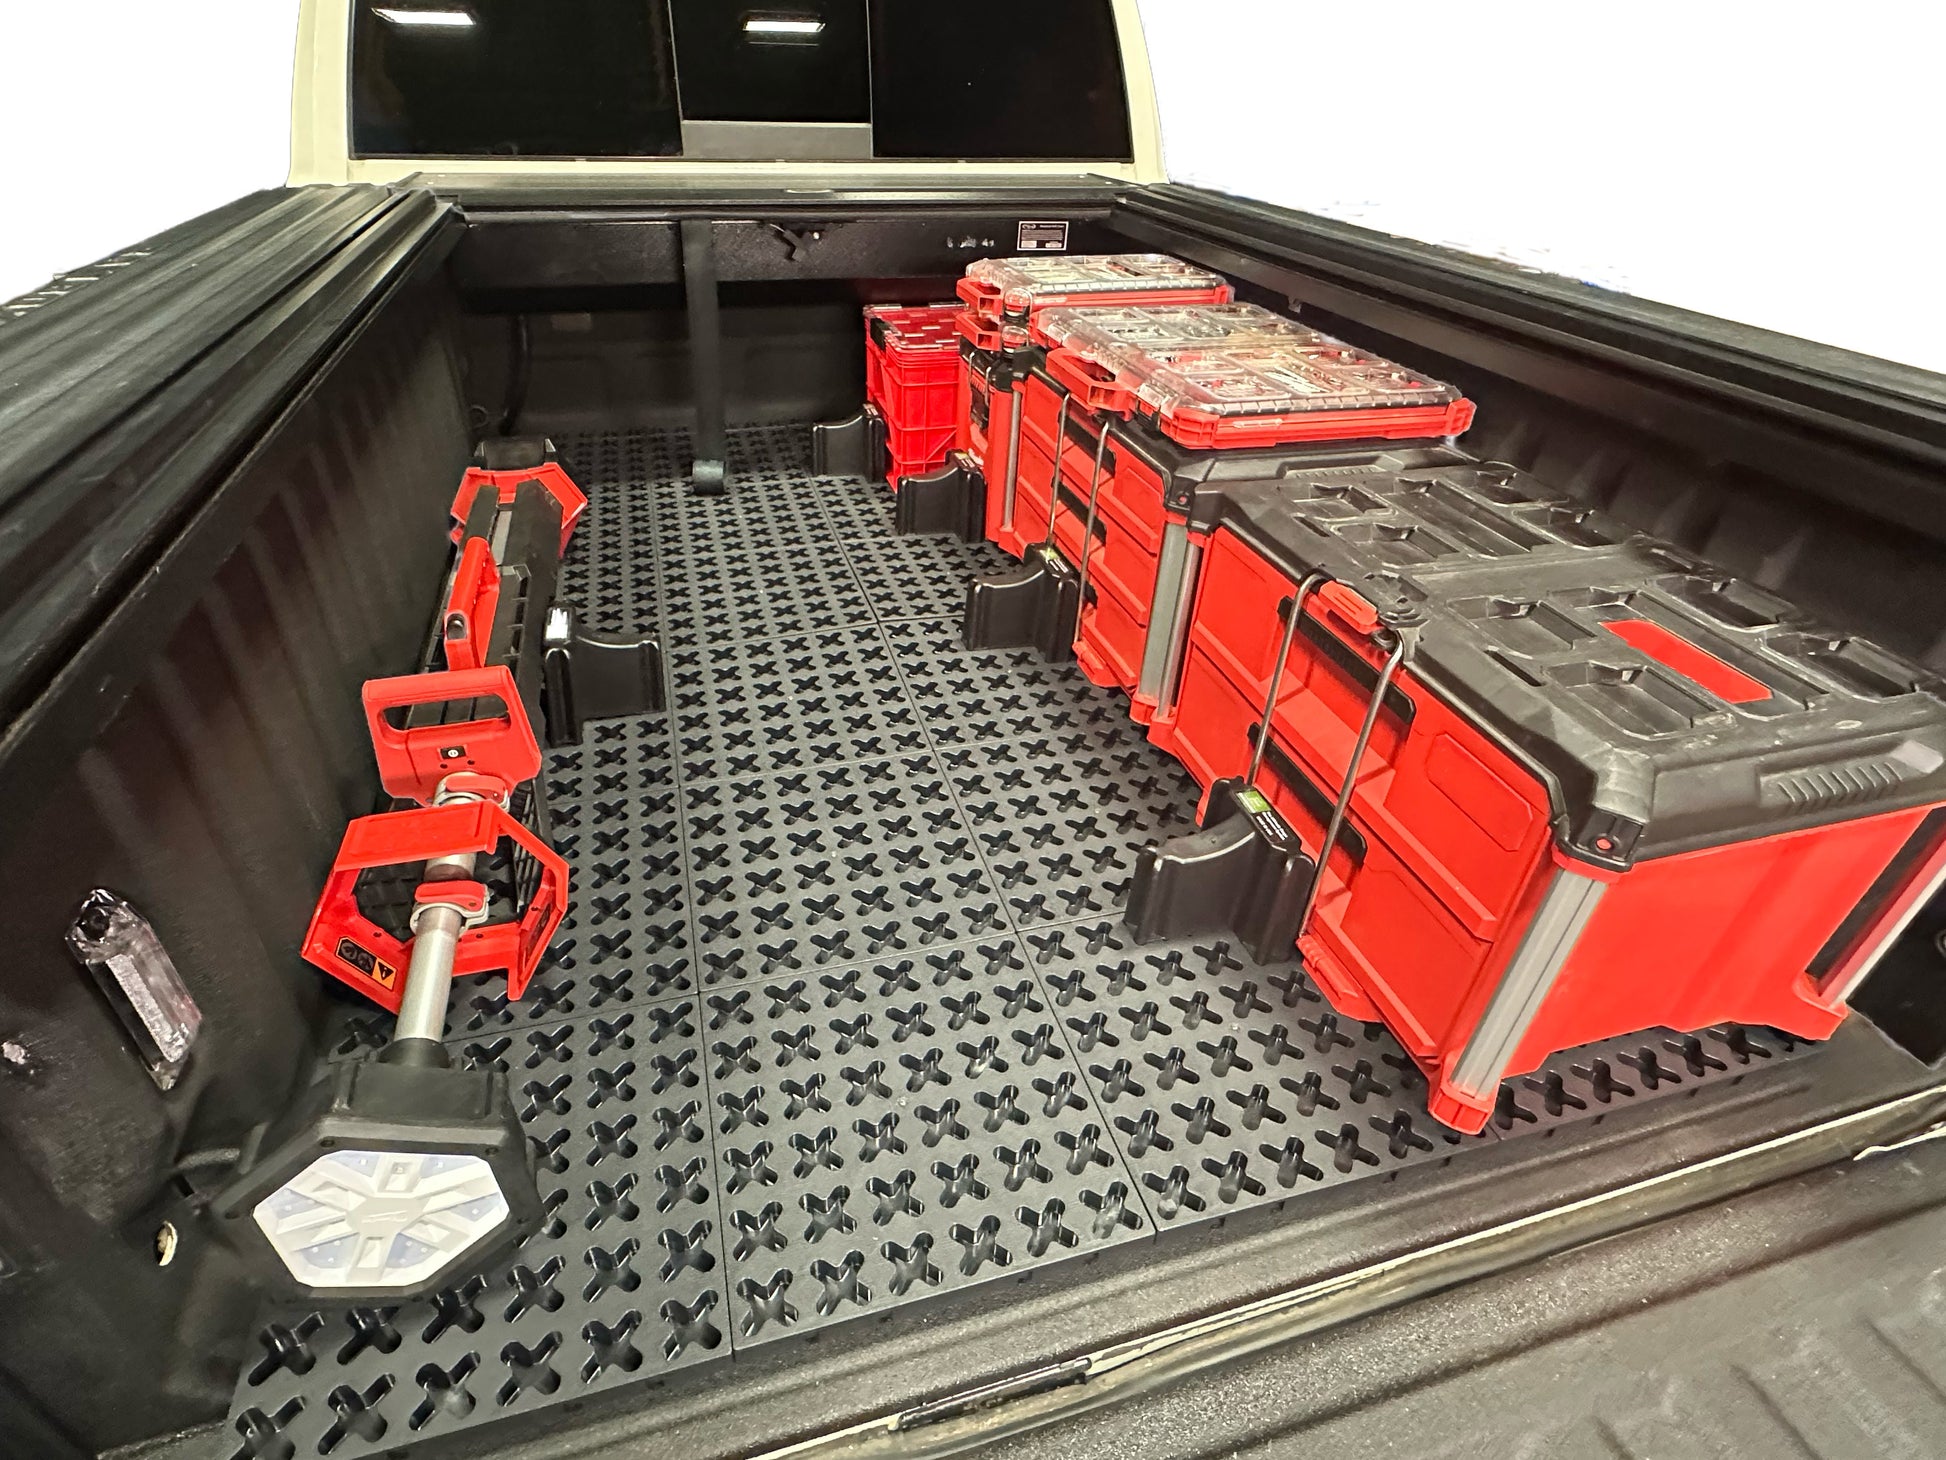 Tmat in a truck bed with Milwaukee Packout toolboxes, a red milk crate, and a shop light.